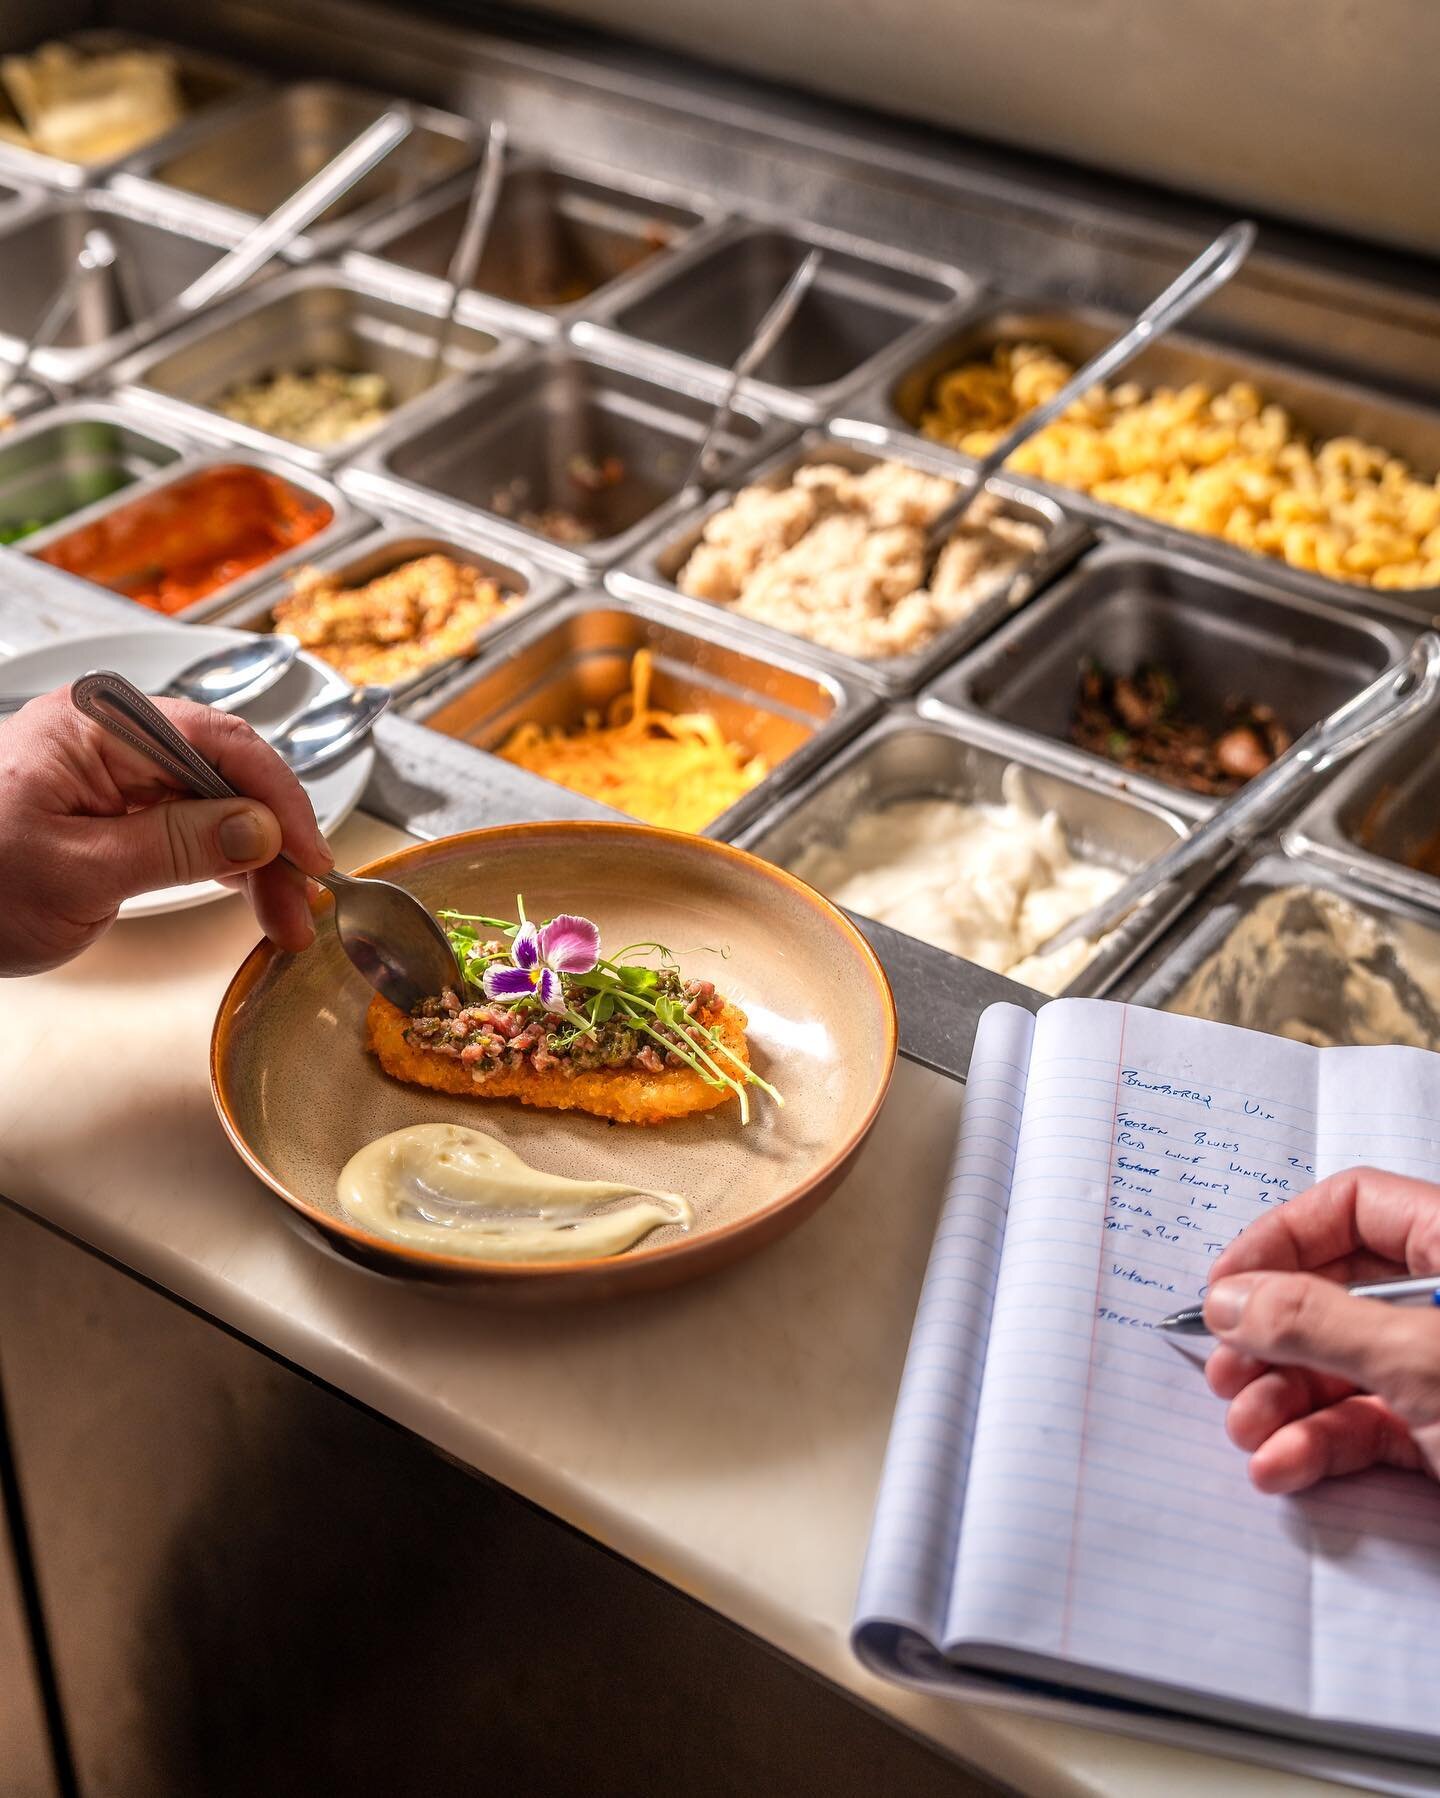 With each new season, our amazing chefs do multiple rounds of R&amp;D to experiment with new ingredients and recipes to turn them into your favorite dishes. We are excited to announce we have a few new dinner options coming very soon, stay tuned!